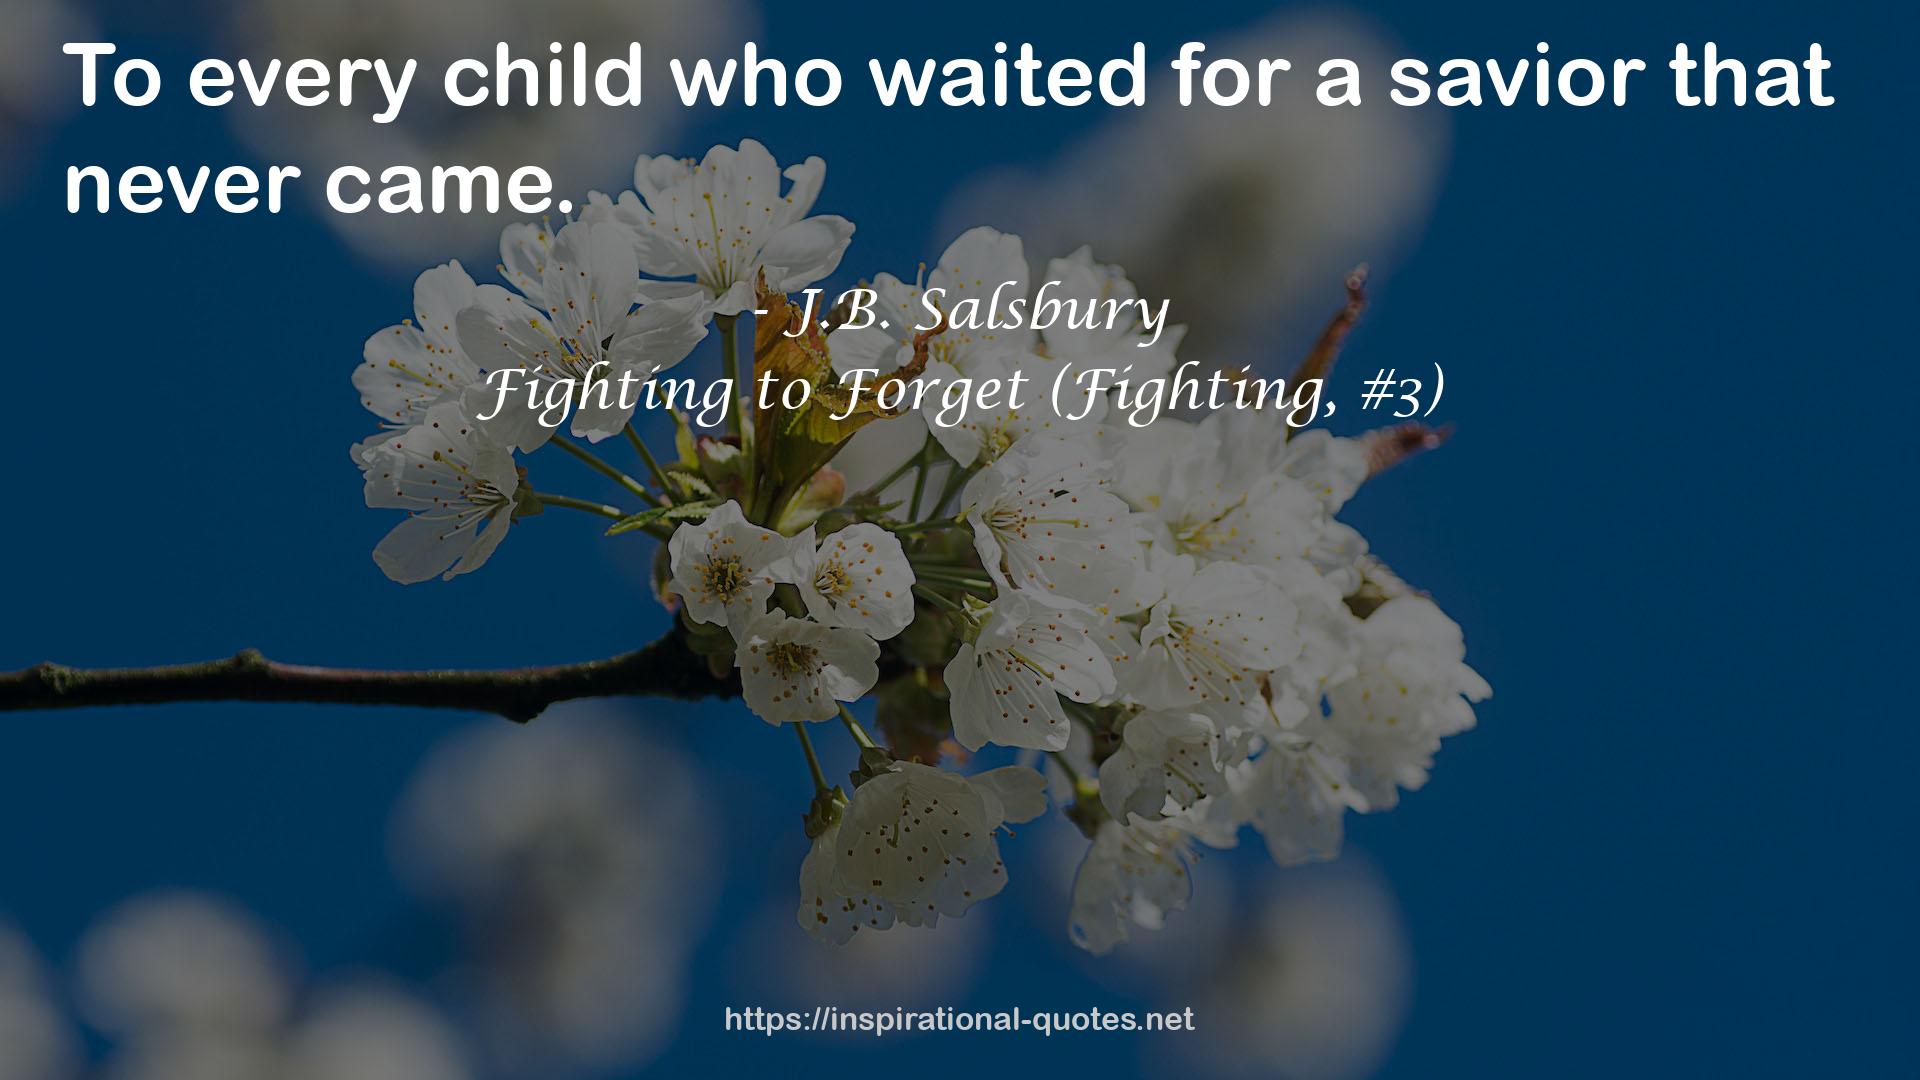 Fighting to Forget (Fighting, #3) QUOTES